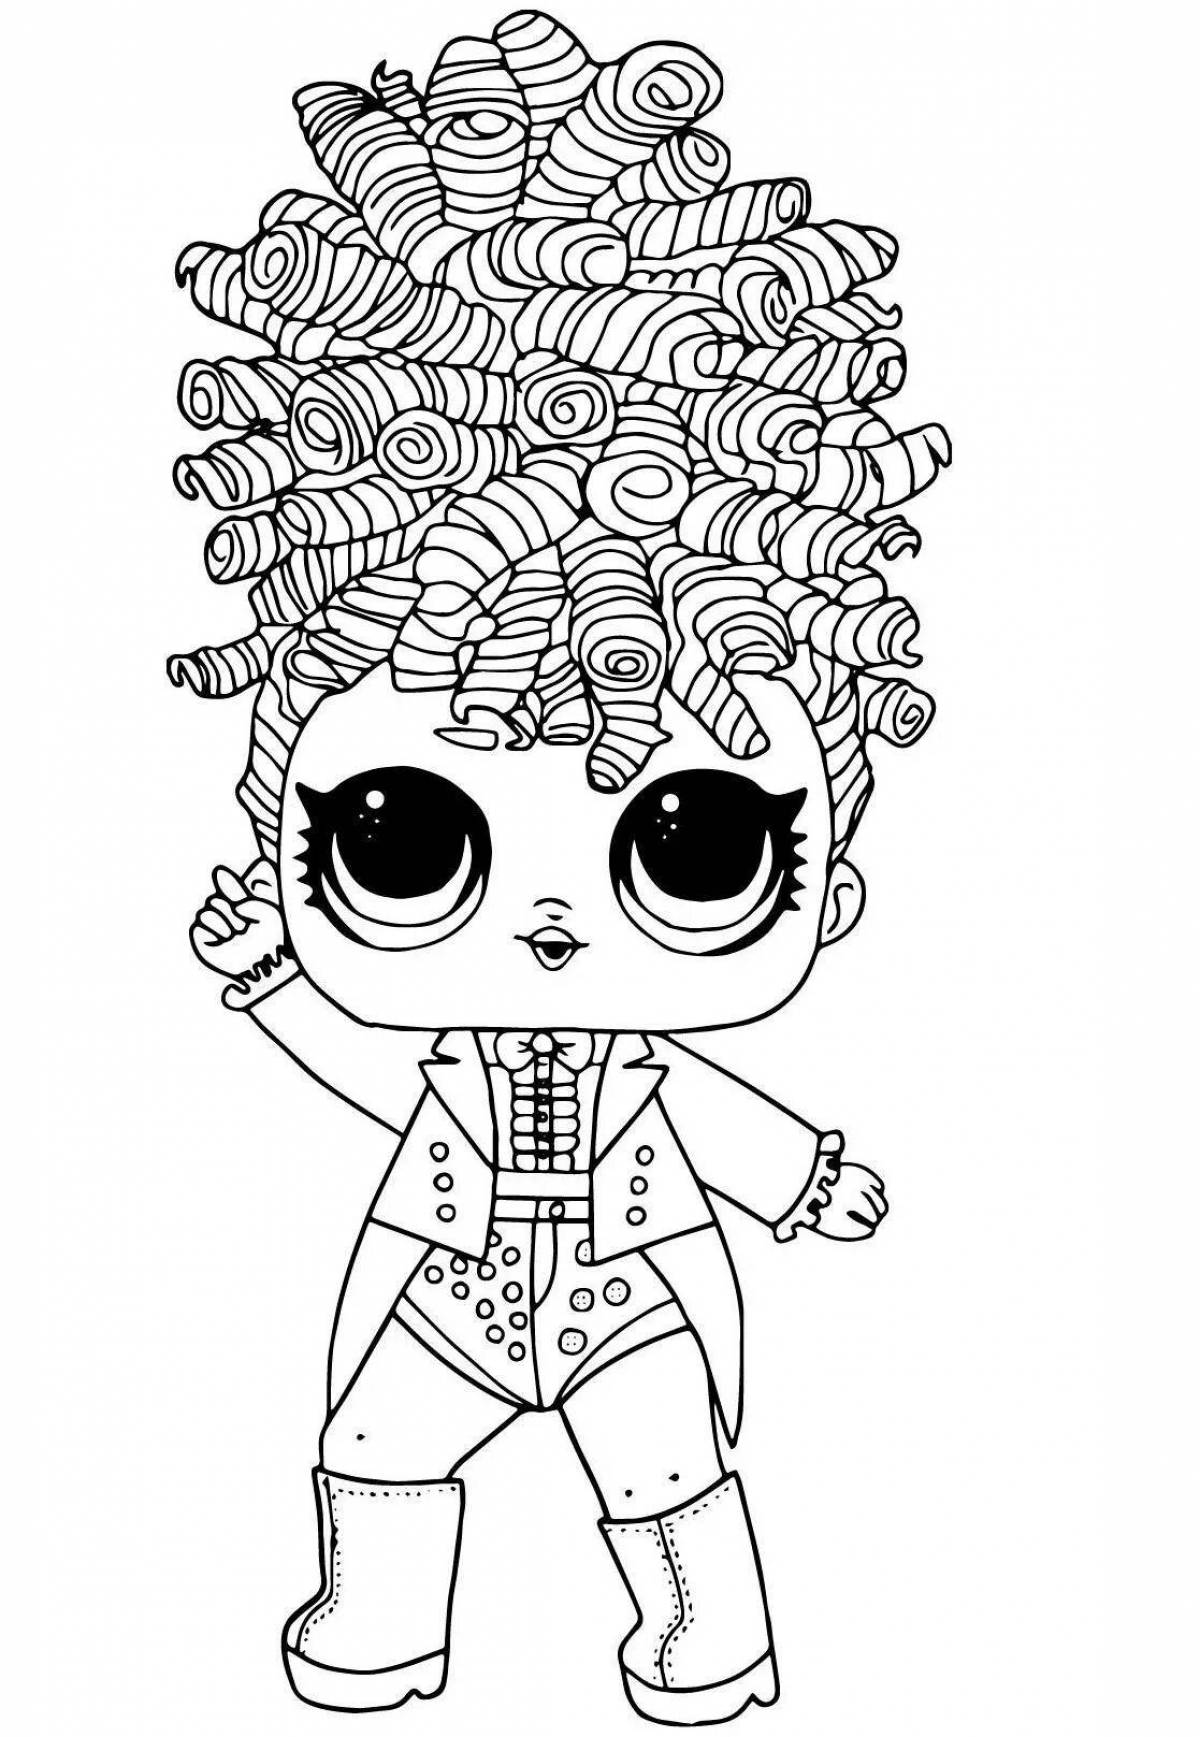 Sparkly coloring lol flower doll